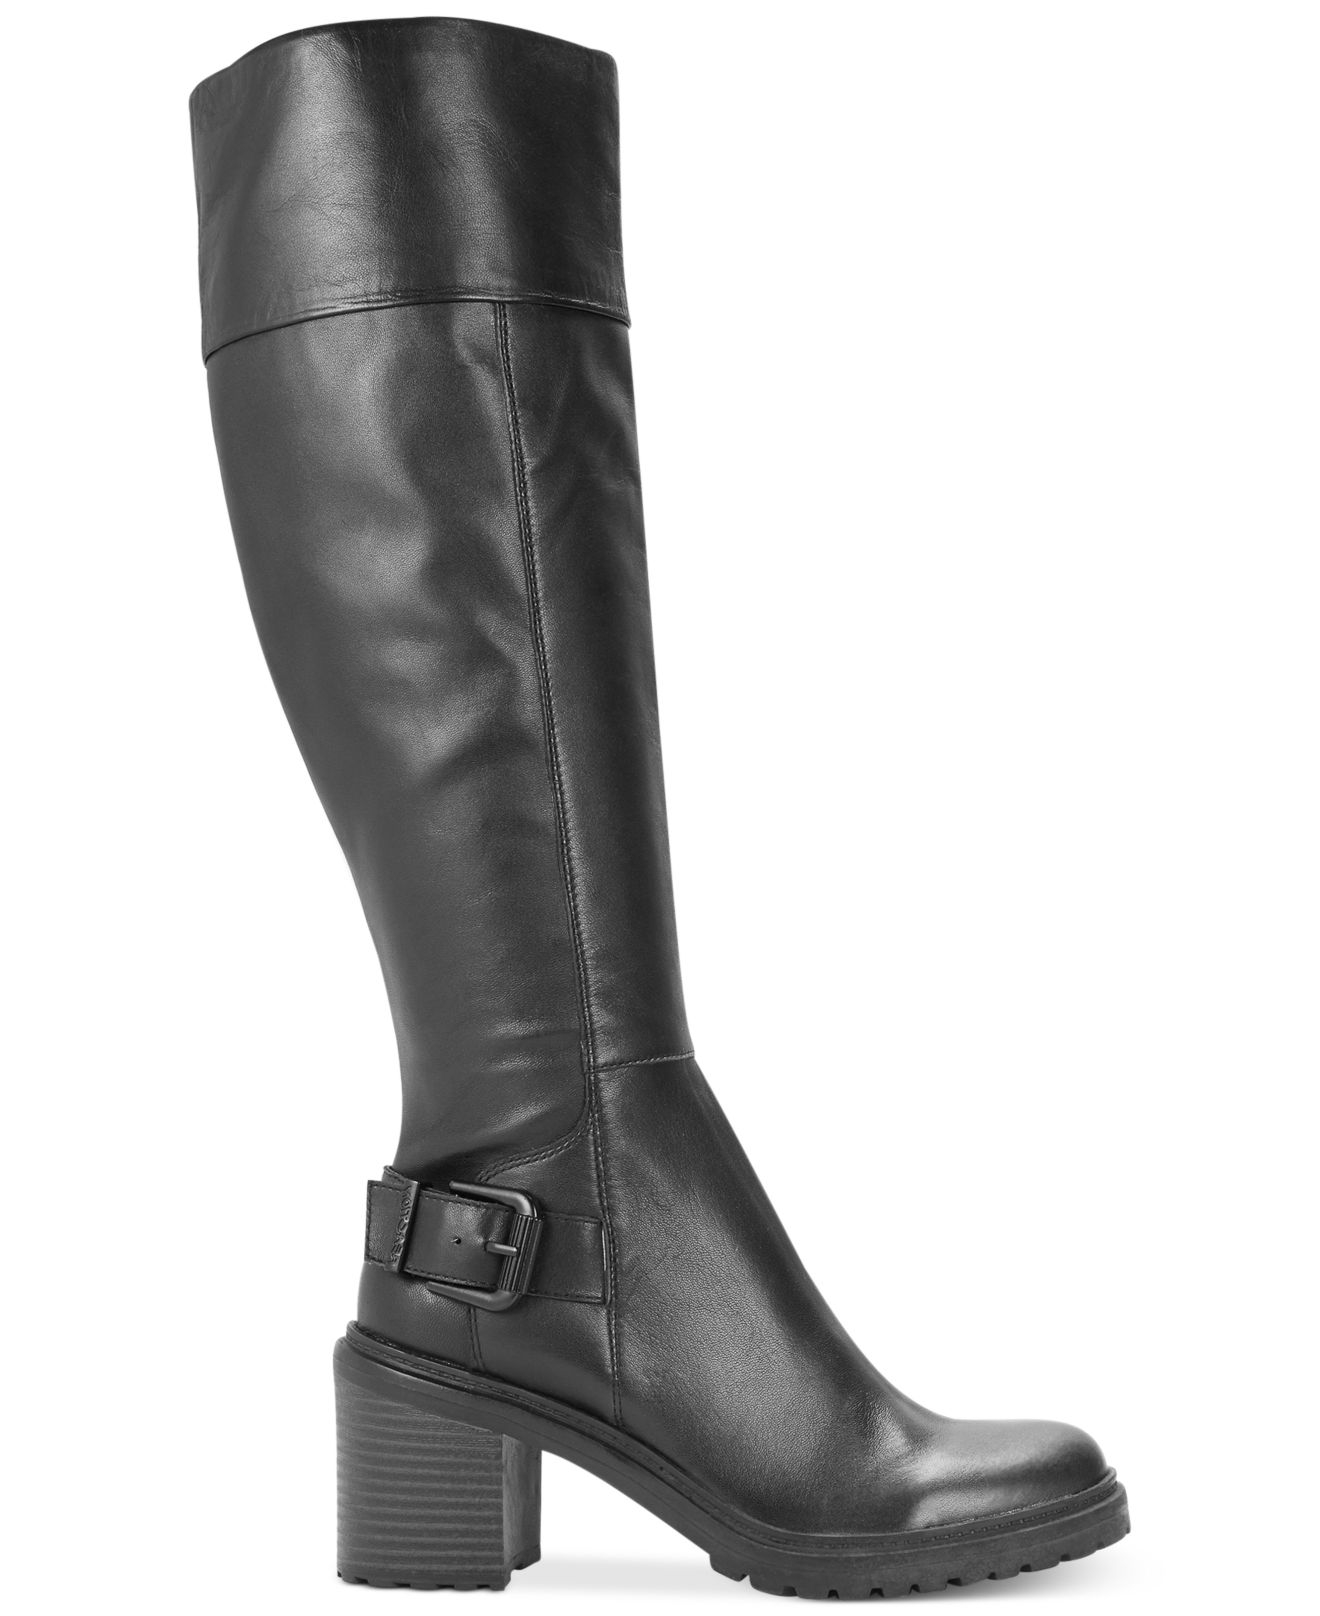 Lyst - Kenneth Cole Reaction Women'S Rocky Hill Tall Boots in Black